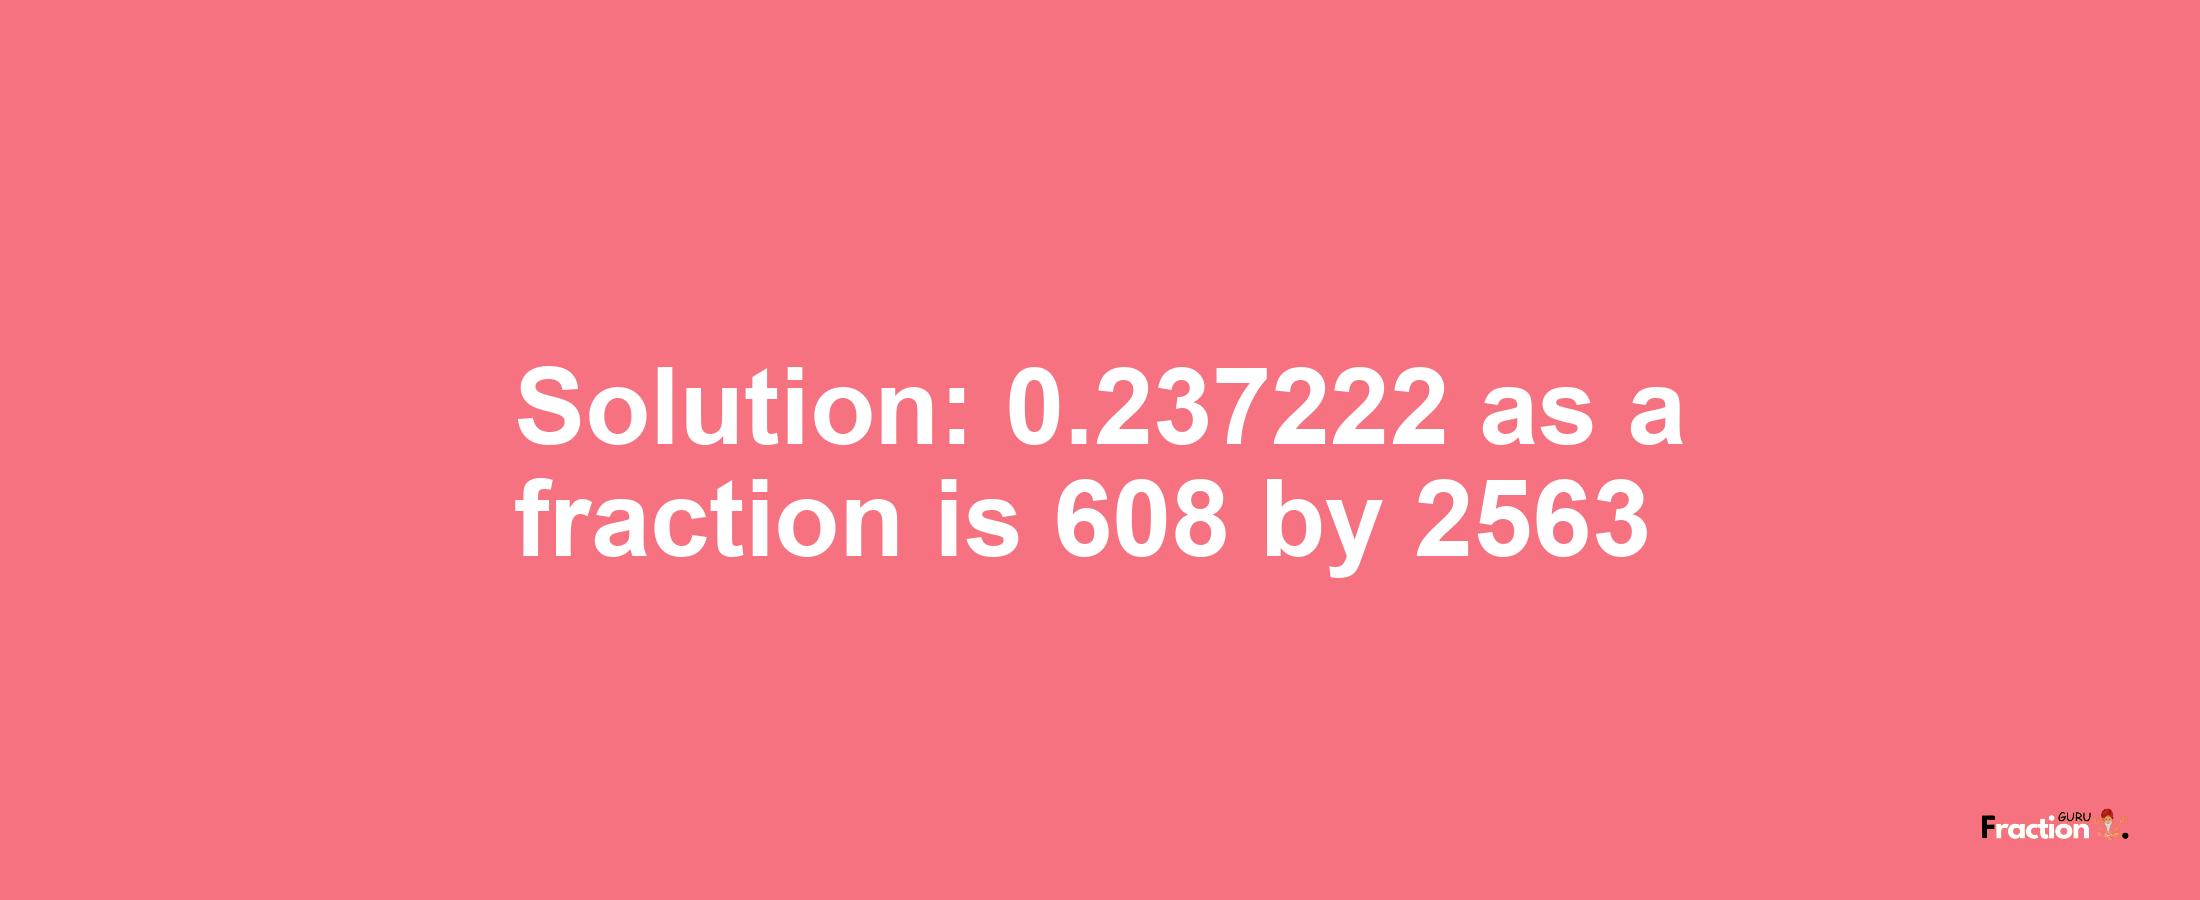 Solution:0.237222 as a fraction is 608/2563